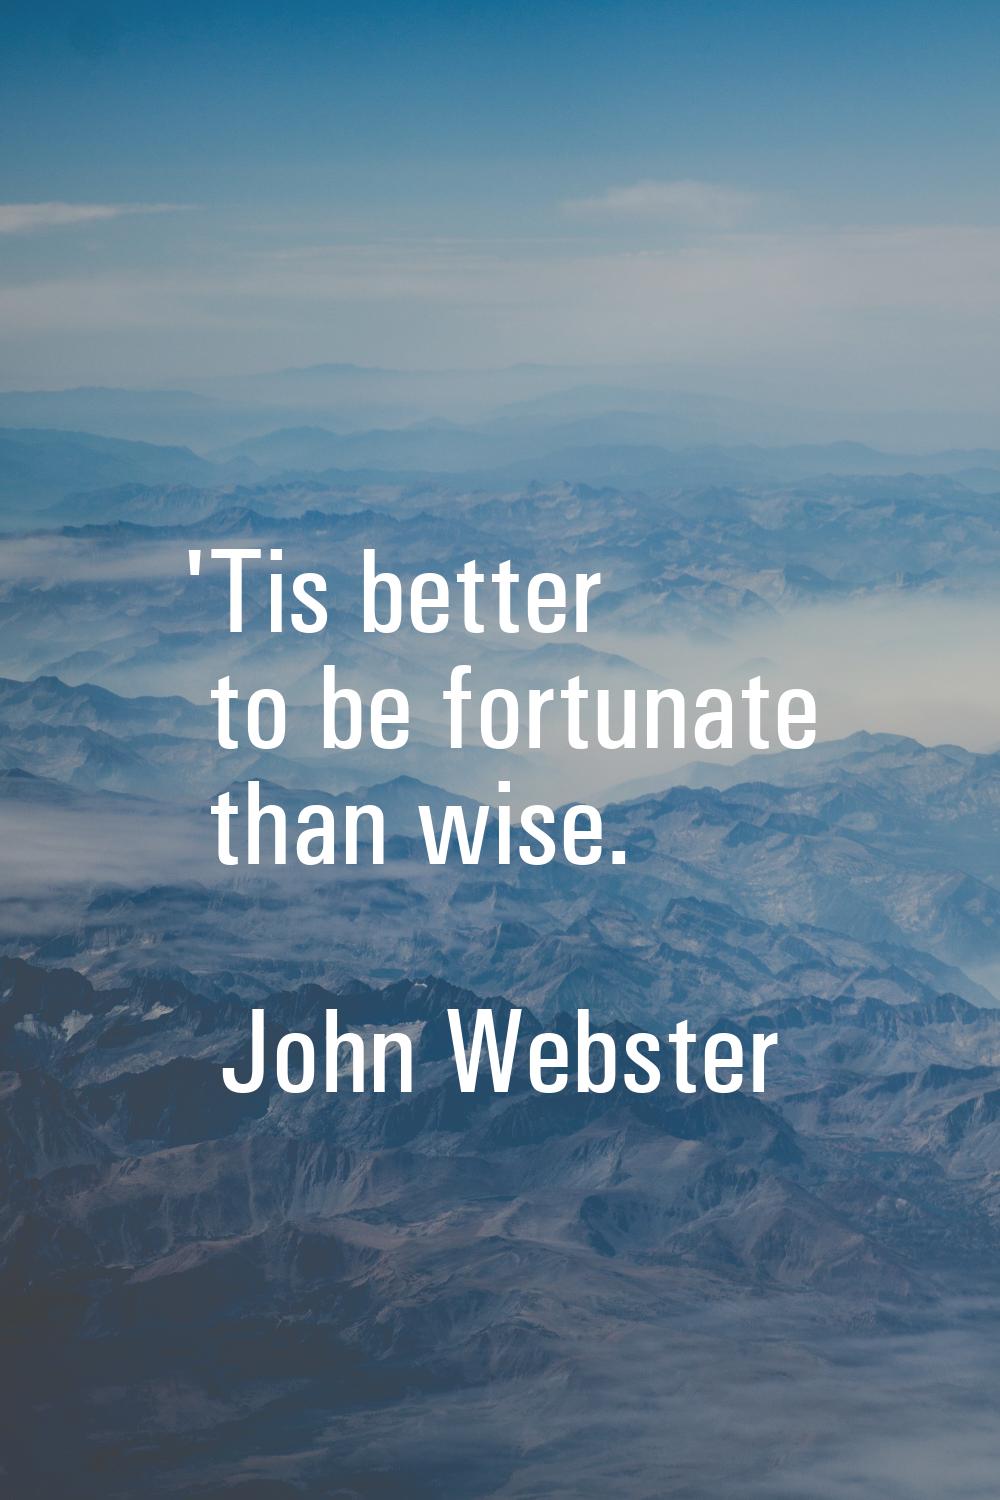 'Tis better to be fortunate than wise.